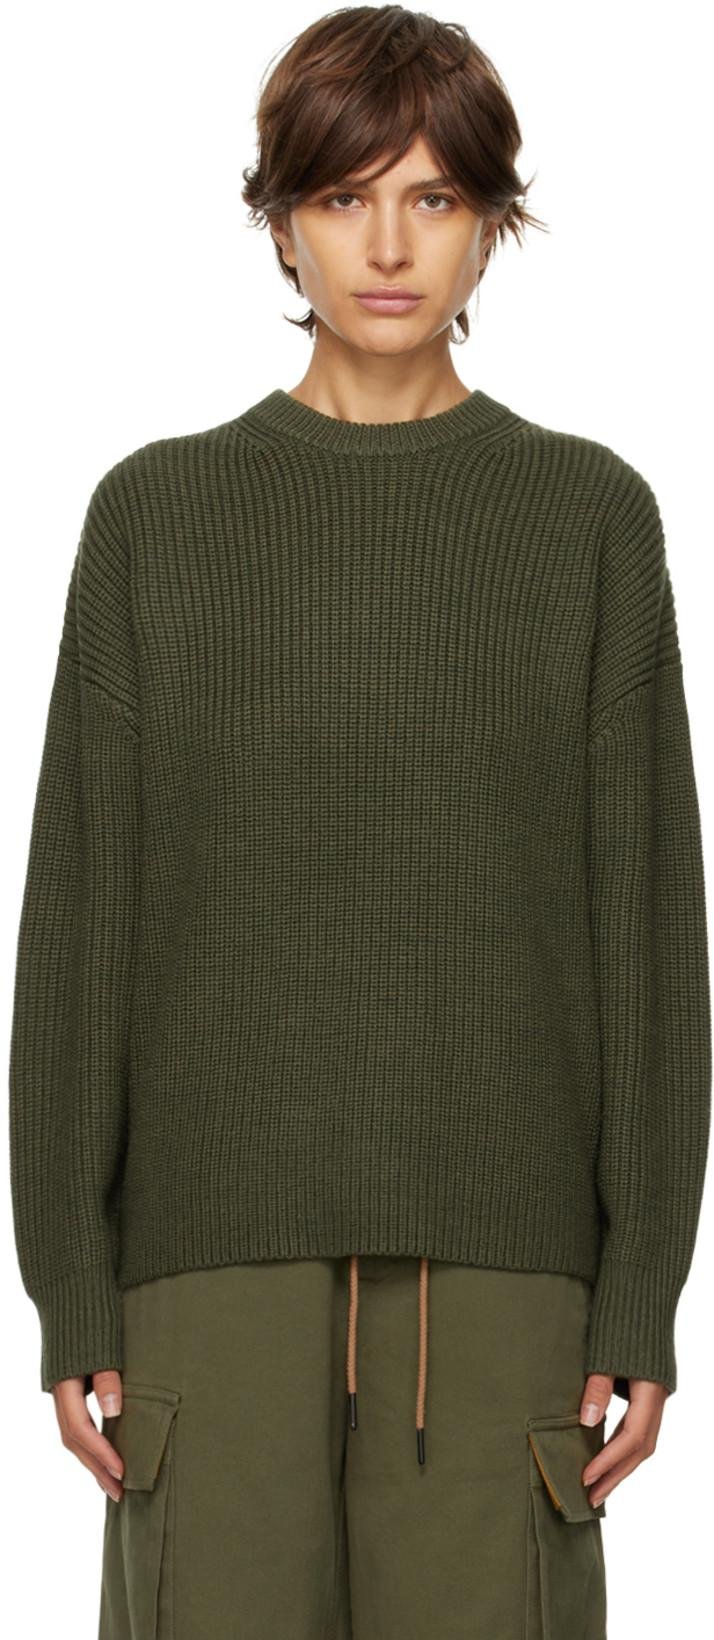 Green Crewneck Sweater by 6397